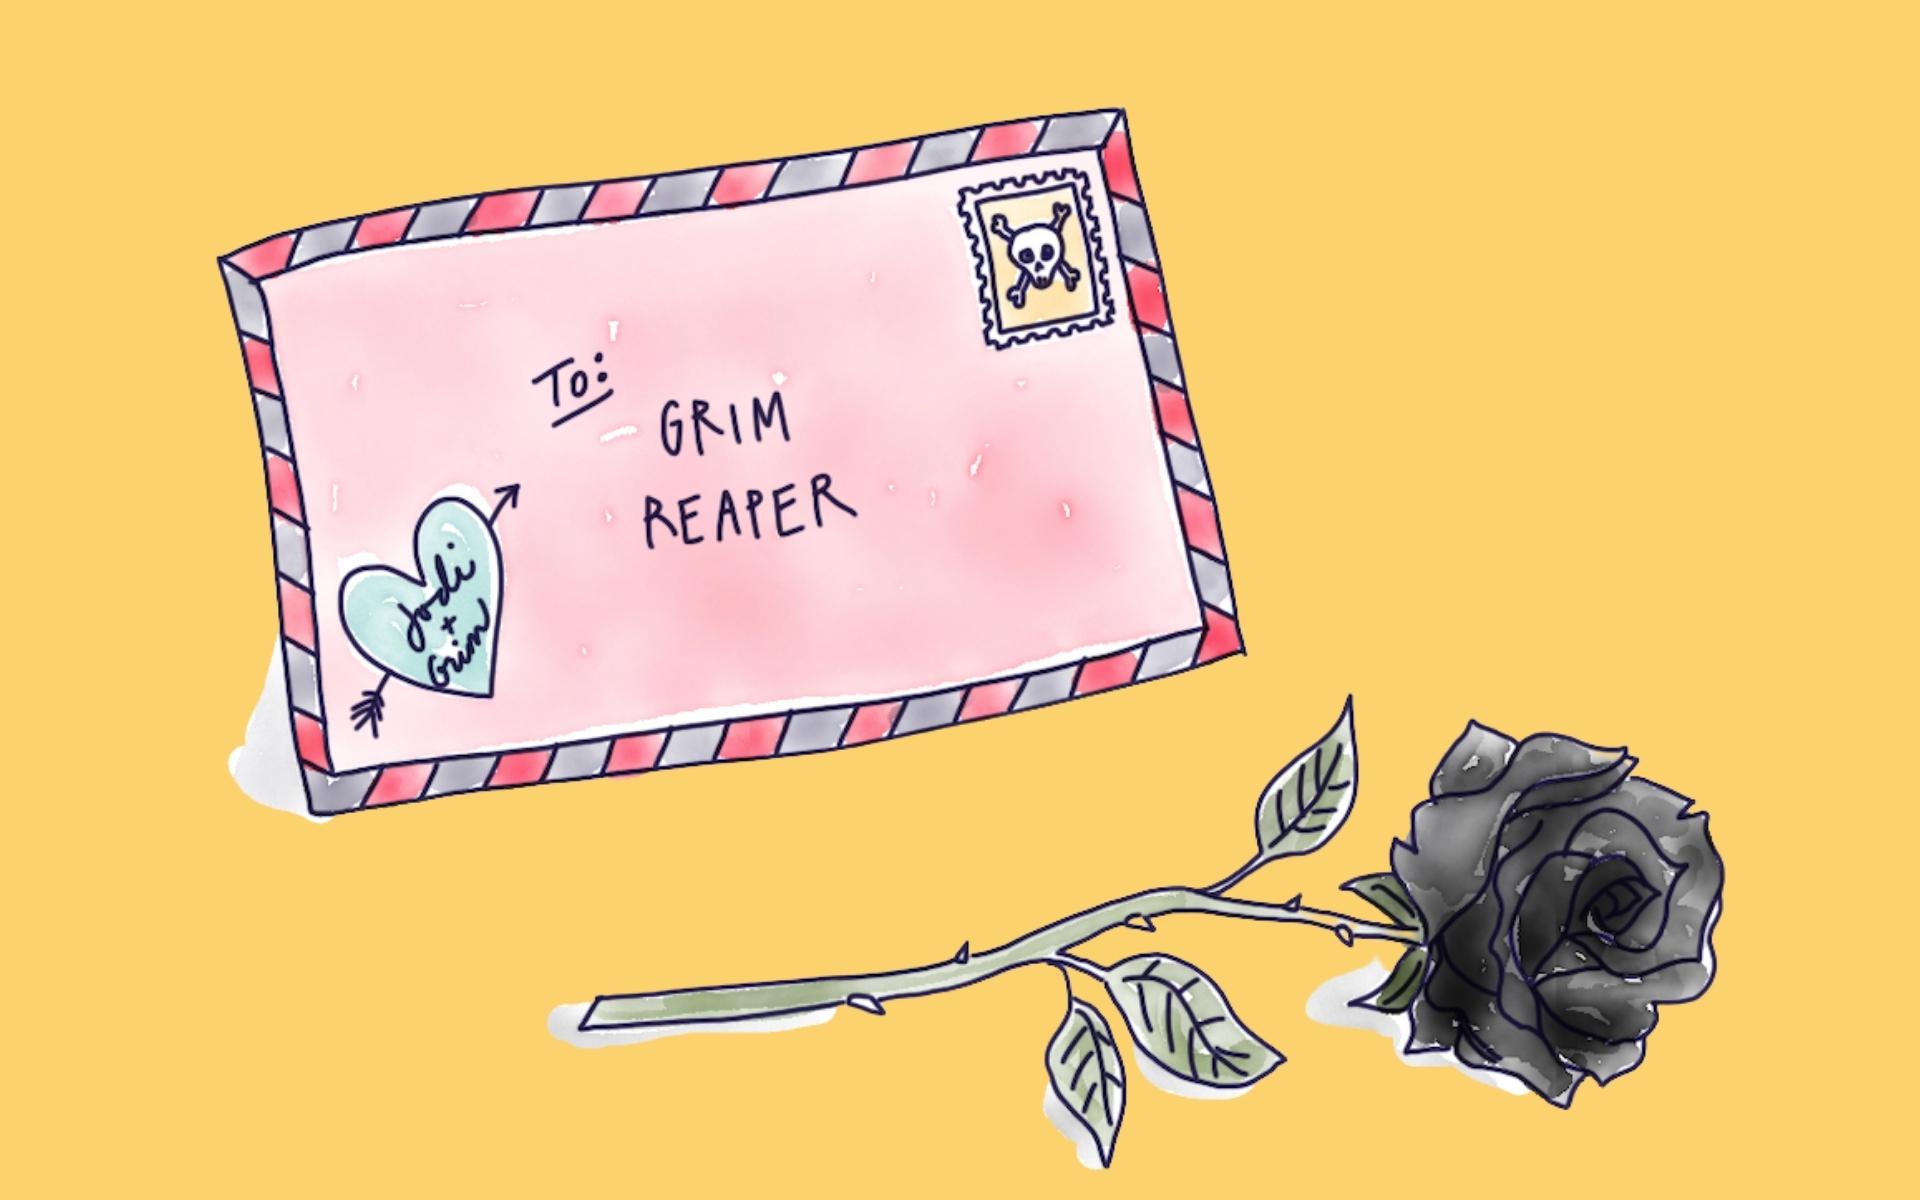 A Love Letter to the Grim Reaper